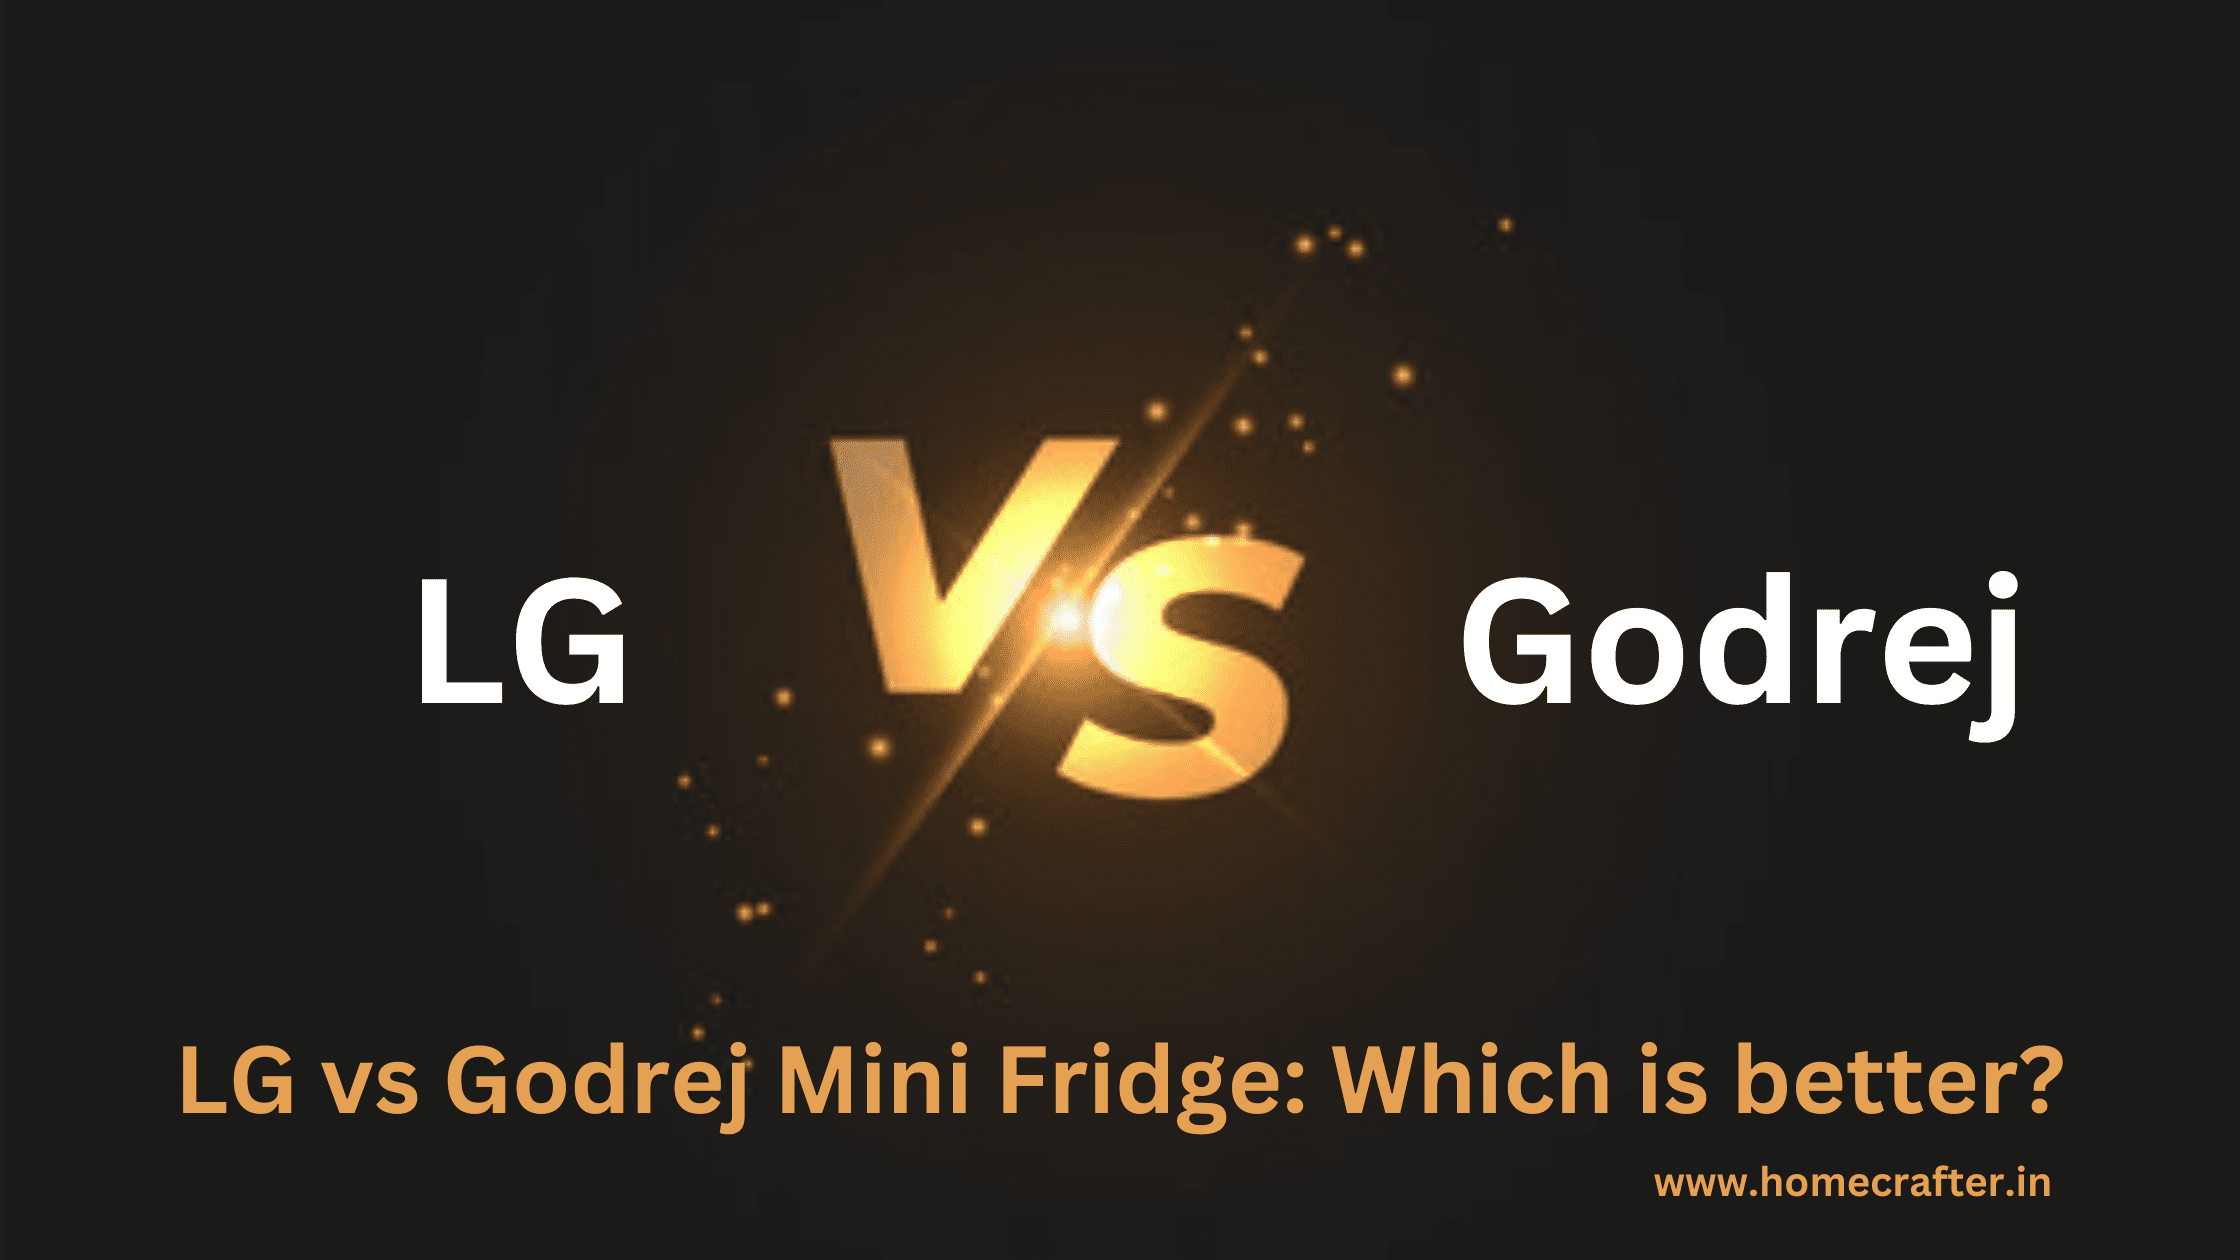 Comparison image featuring two mini fridges side by side: one labeled 'LG' and the other 'Godrej'. Both fridges are of similar size and design, showcasing their respective brands.